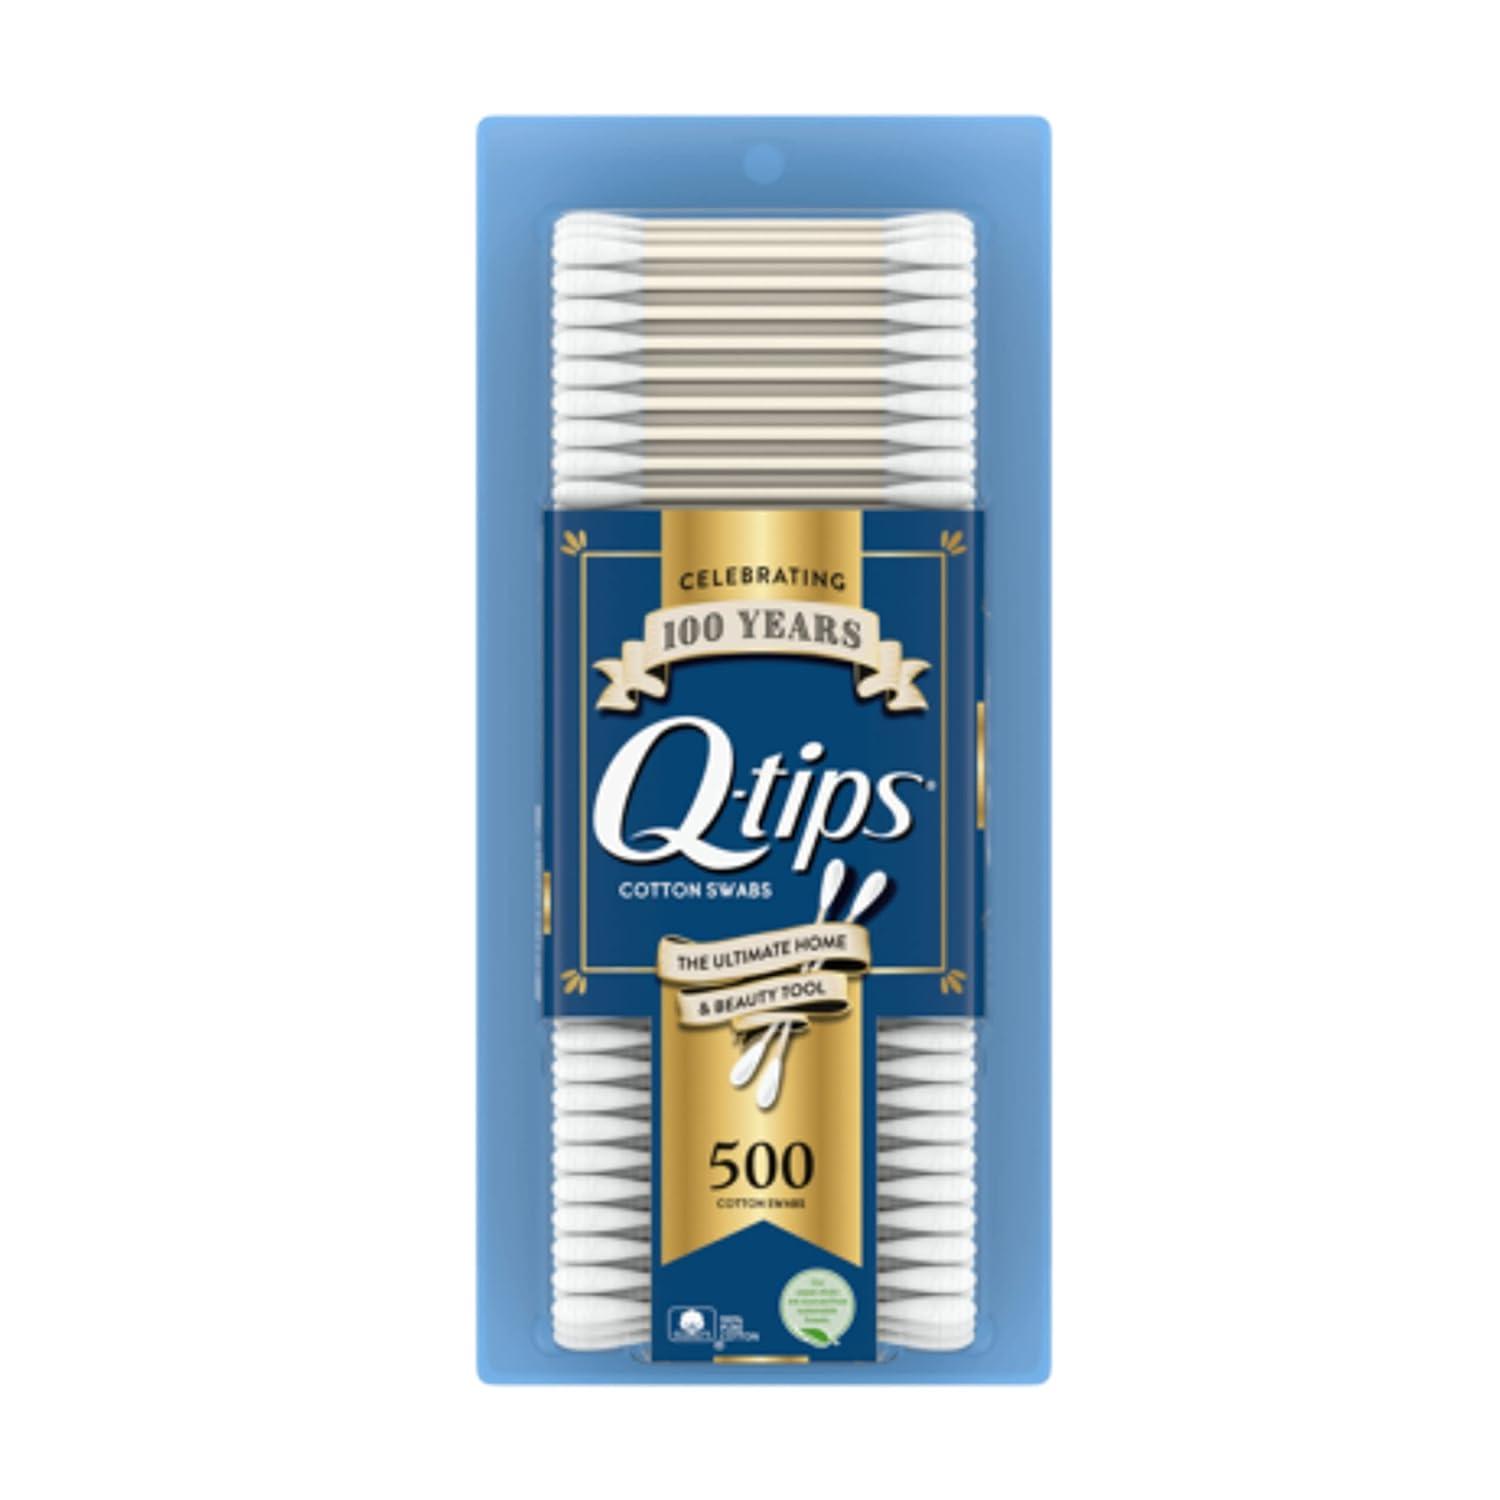 Q-tips Cotton Swabs for Beauty and First Aid Travel Pack 30 Each Pack of 3